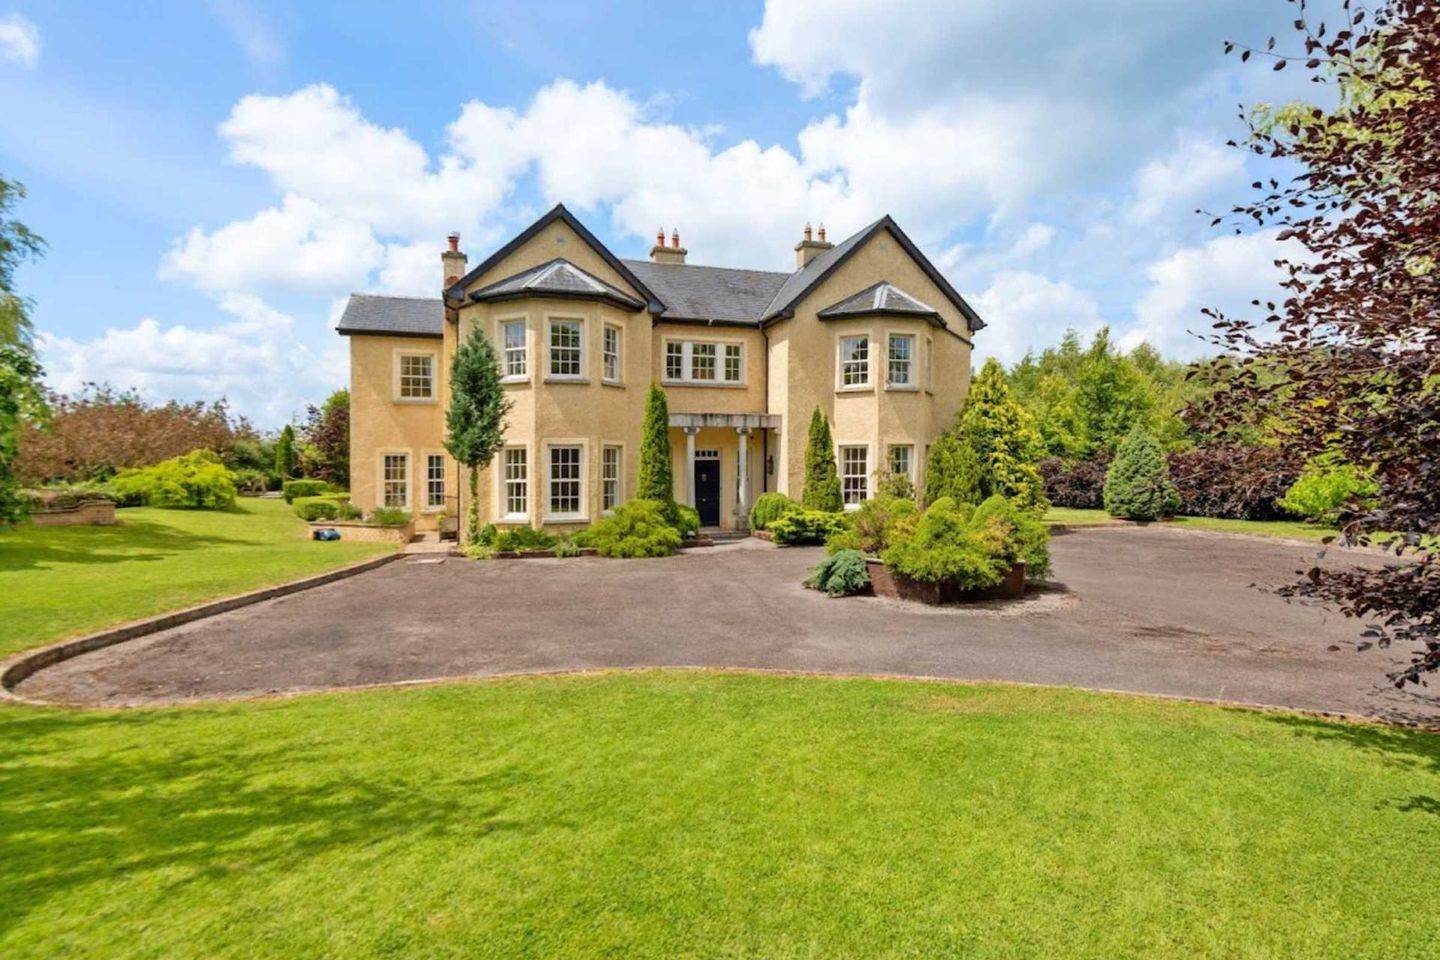 Mulberry Manor, Dunboyne, Co. Meath, A85Y832